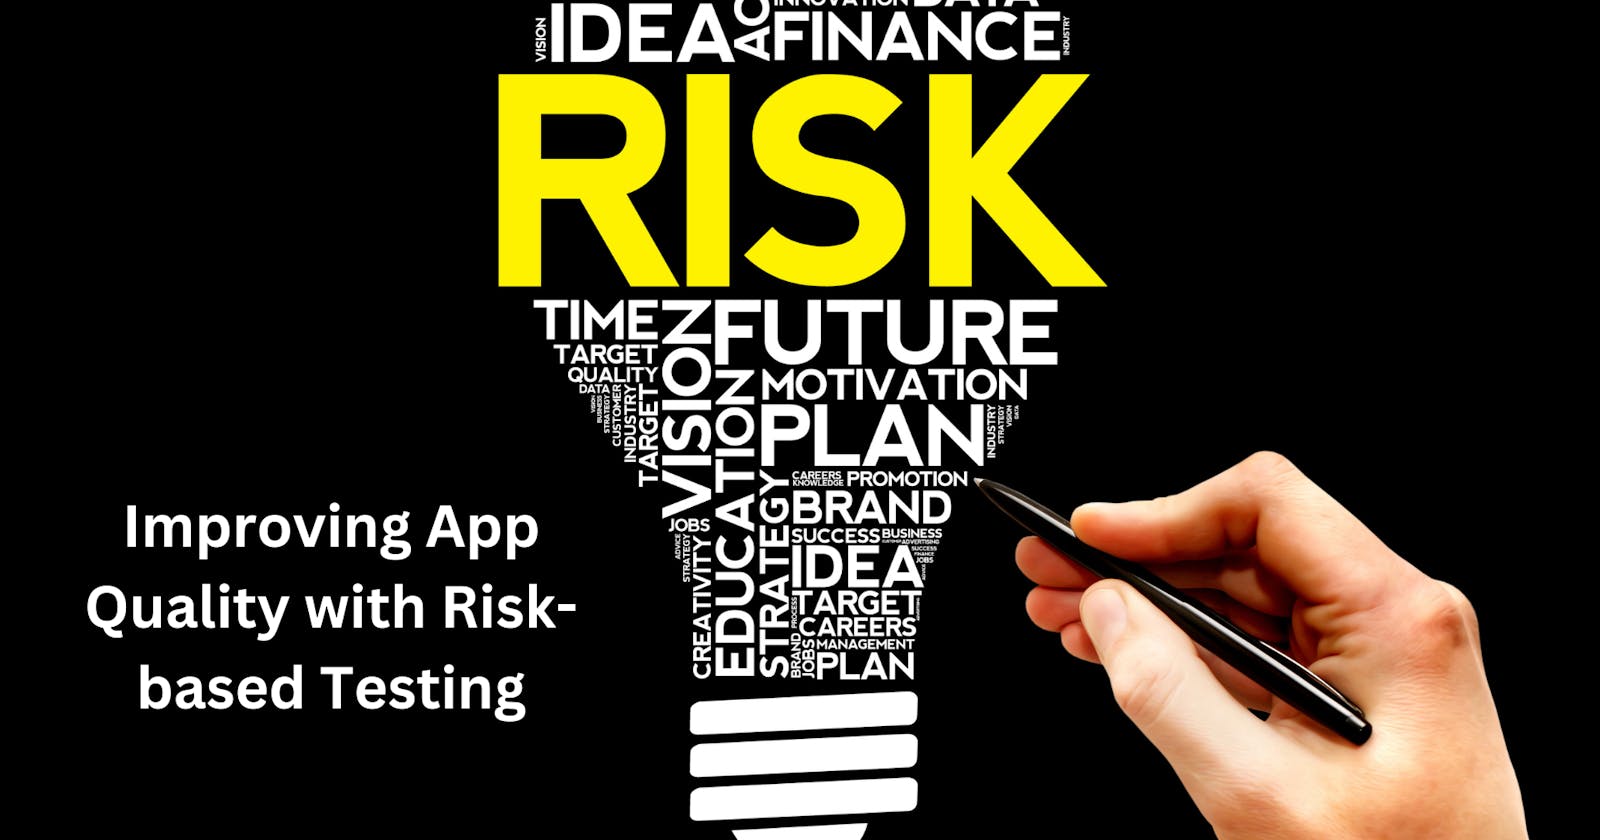 Improving App Quality with Risk-based Testing